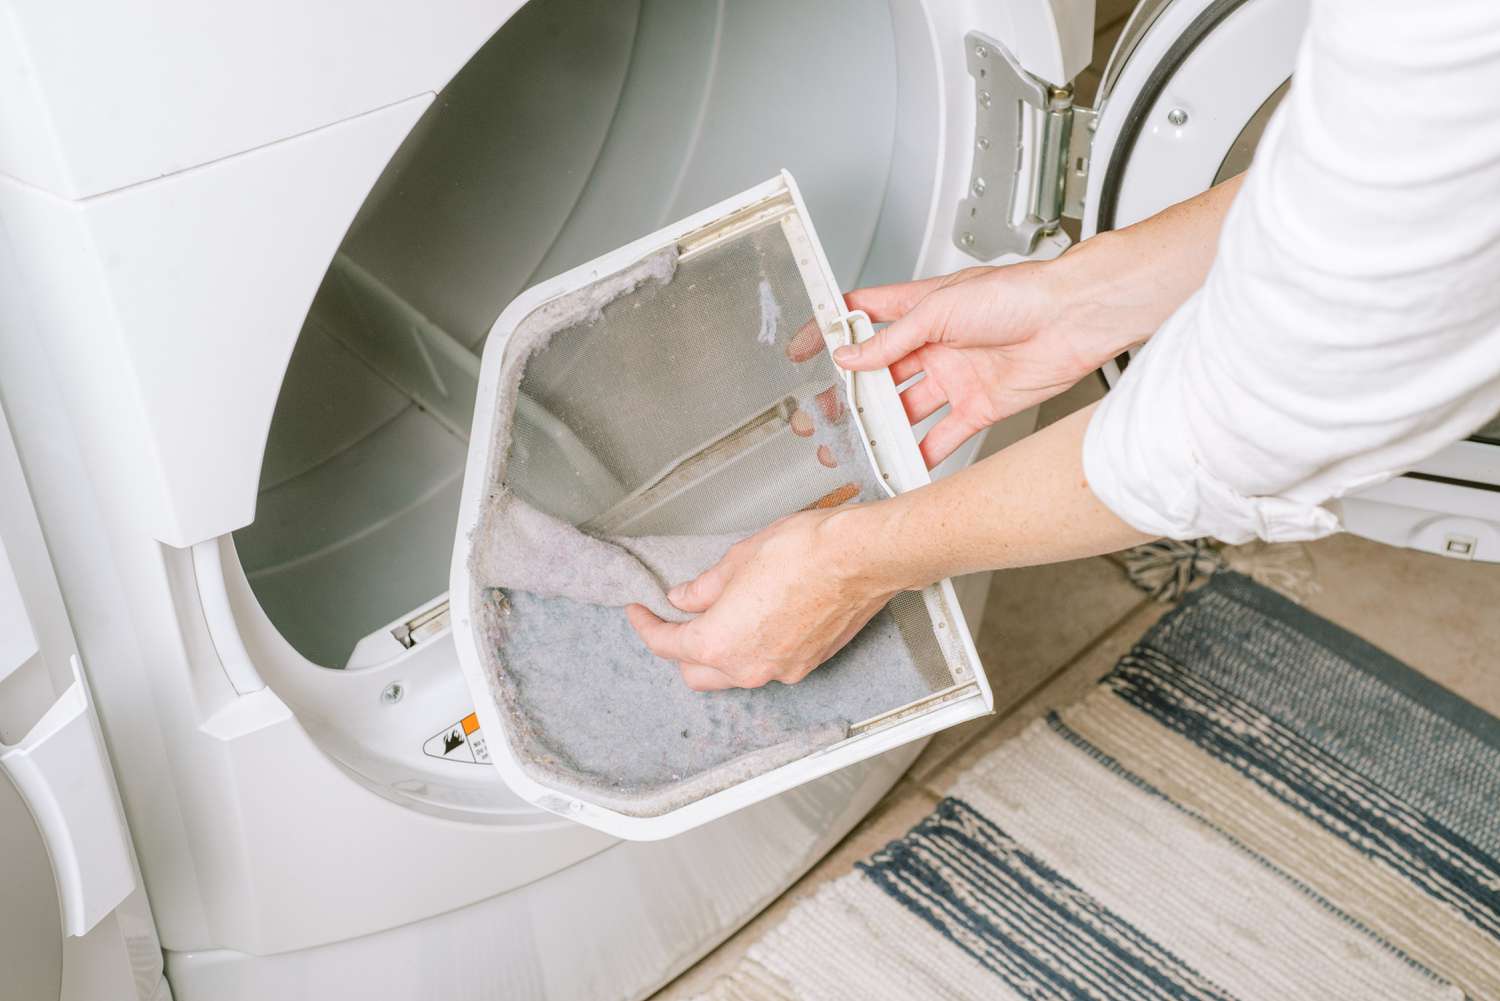 How To Sanitize A Dryer